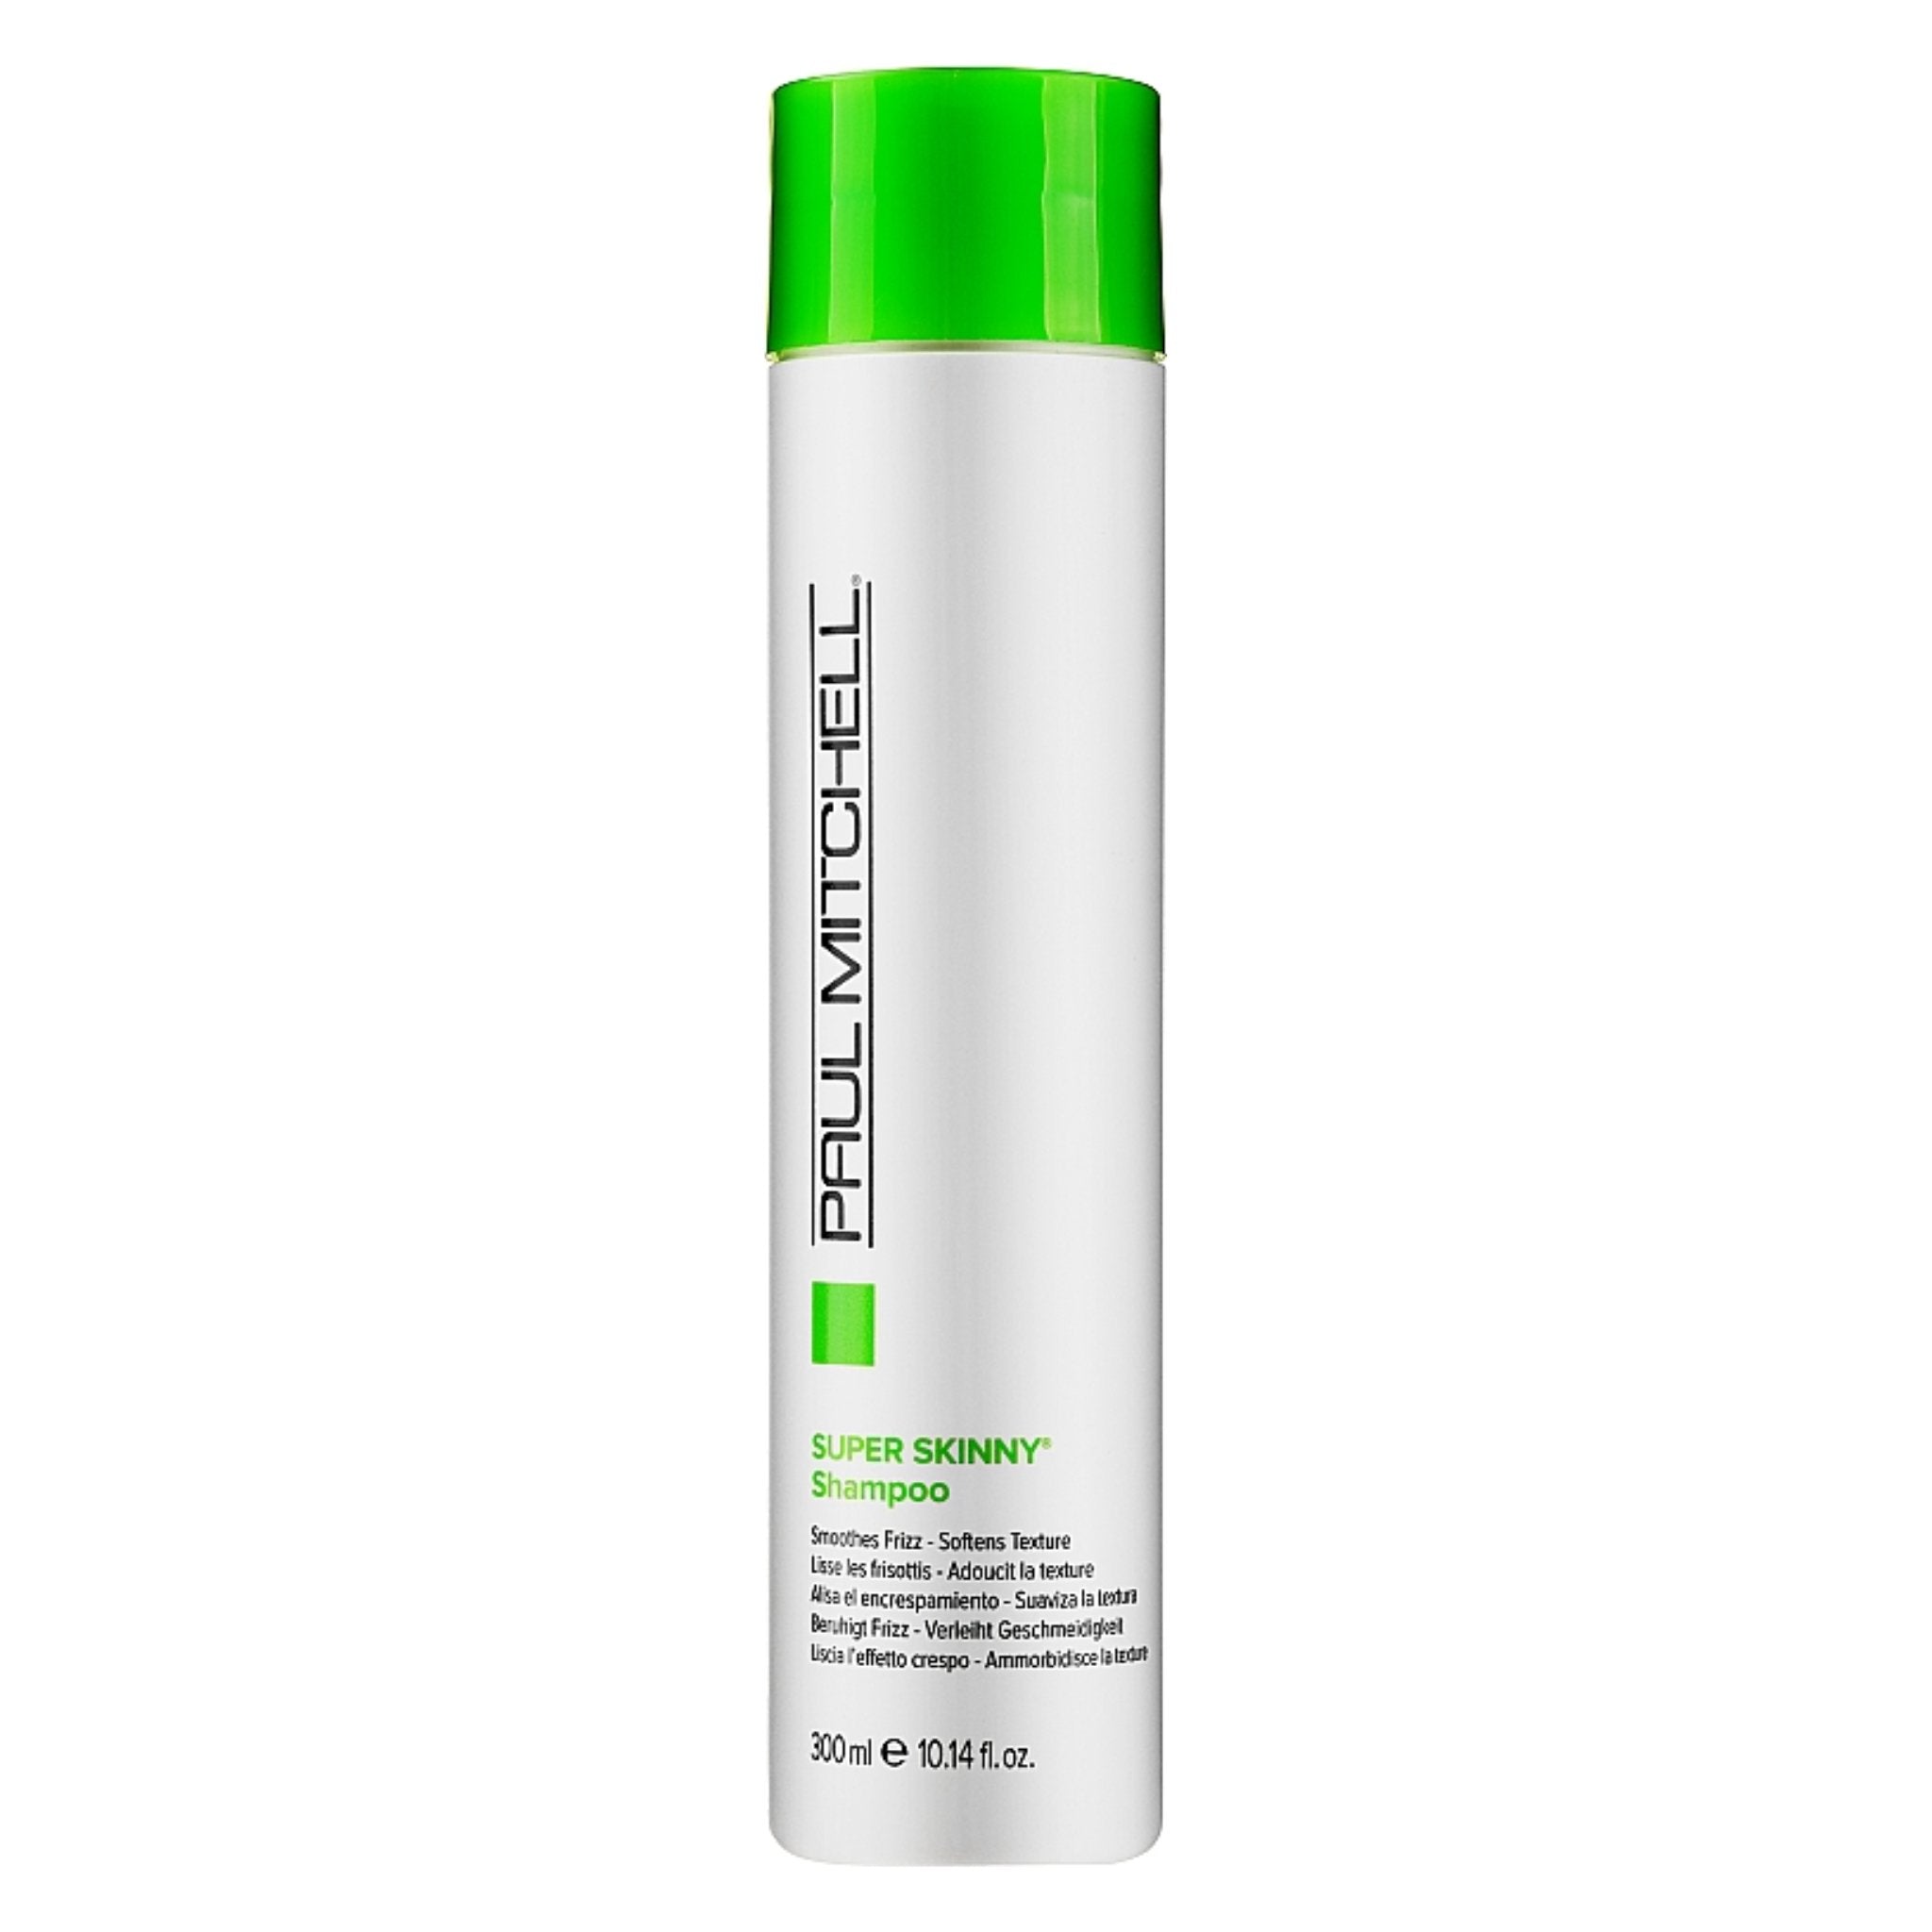 Paul Mitchell. Shampoing Lissant Super Skinny - 300 ml - Concept C. Shop